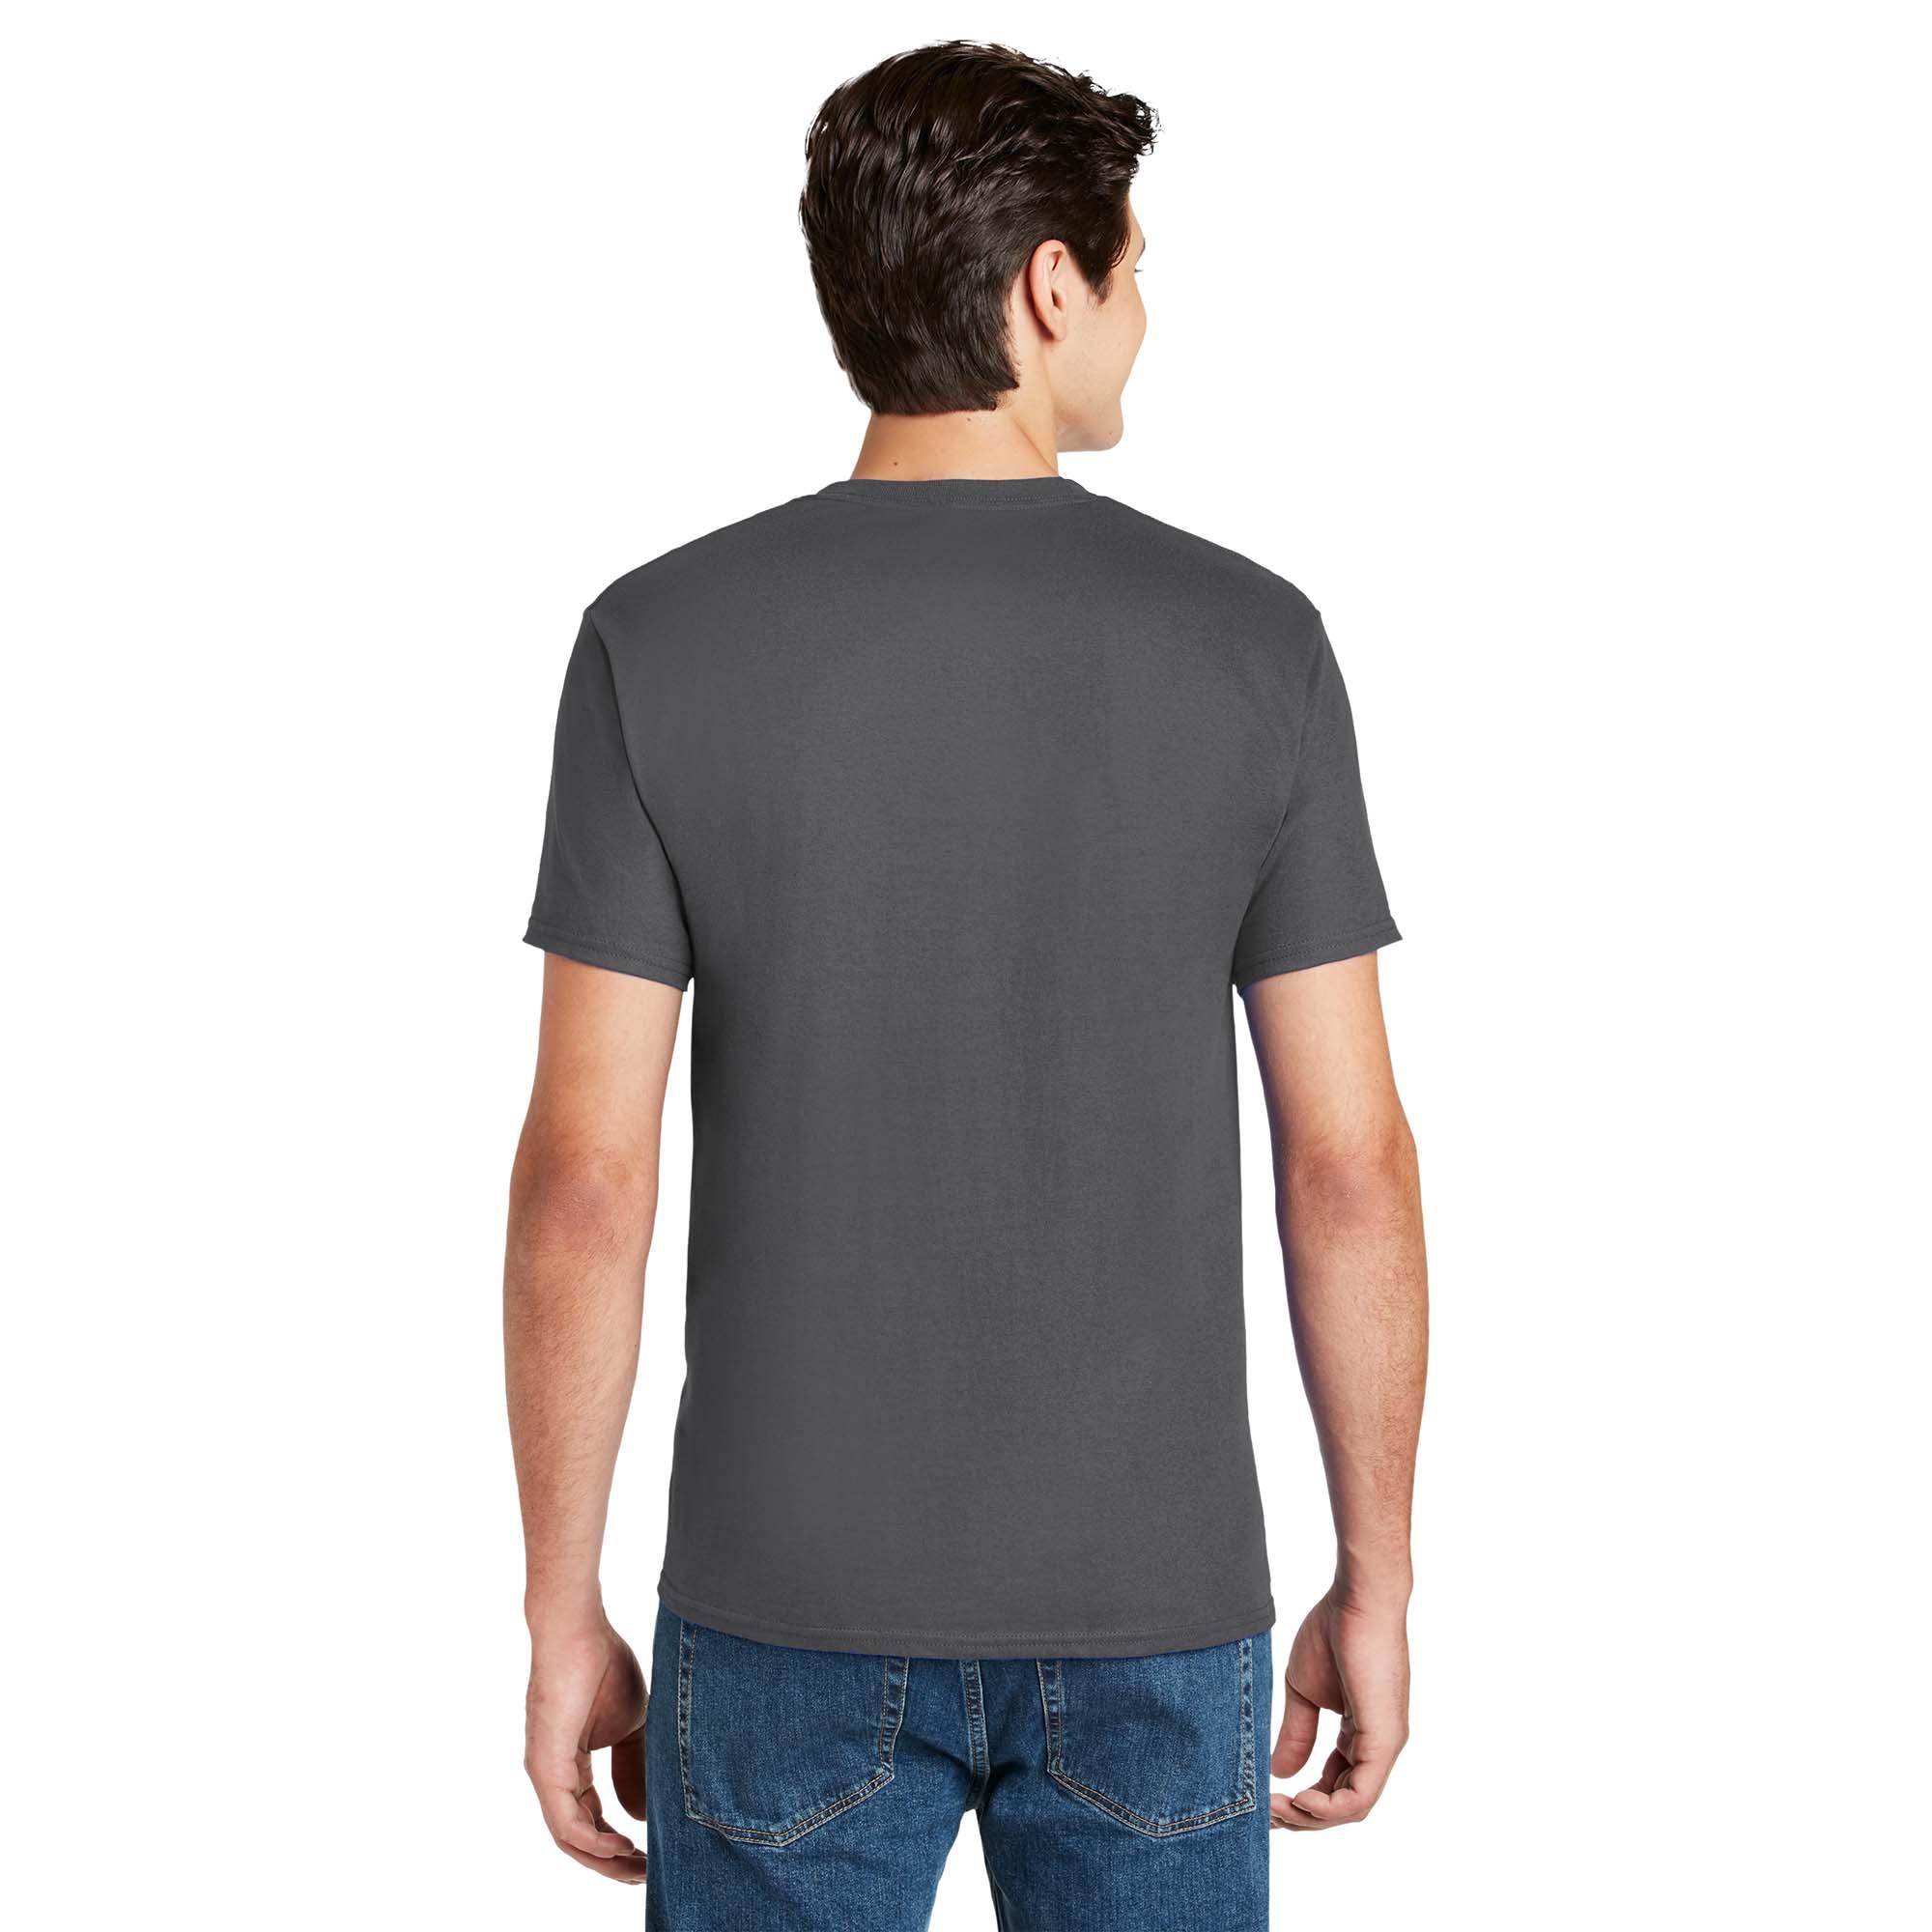 Hanes 5590 Authentic 100% Cotton T-Shirt with Pocket - Smoke Grey ...